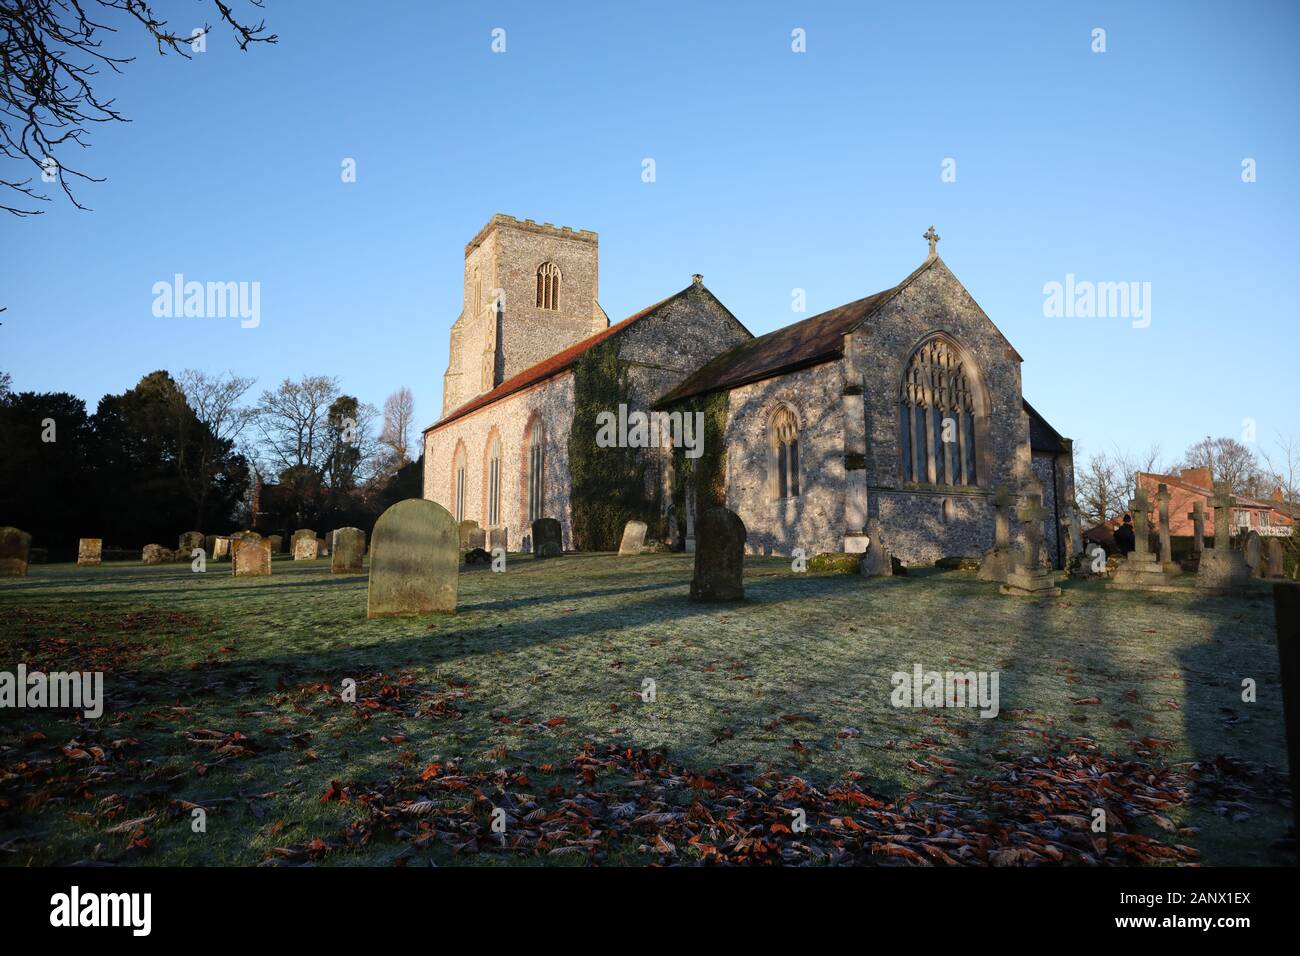 Early Morning Sun Lights Up St Mary S Church For The Sunday Morning Church Service In Hillington Norfolk Uk On January 19 Stock Photo Alamy